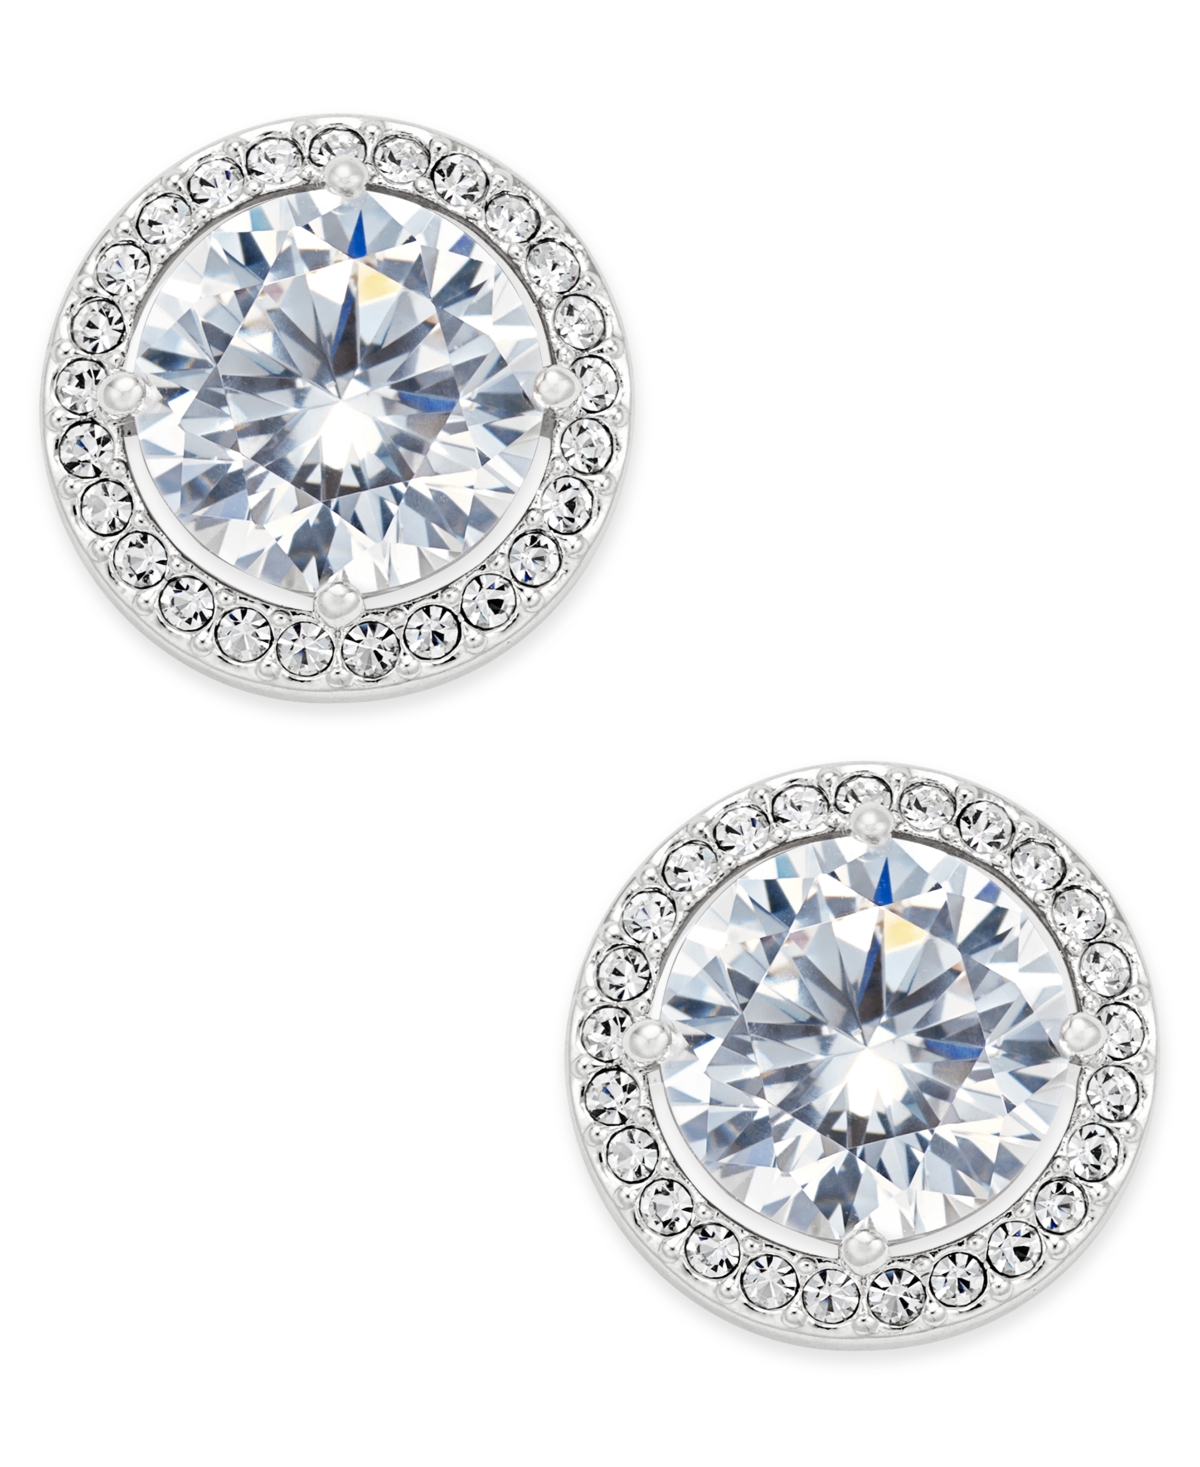 Silver-Tone Cubic Zirconia Framed Stud Earrings, Created for Macy's - Silver